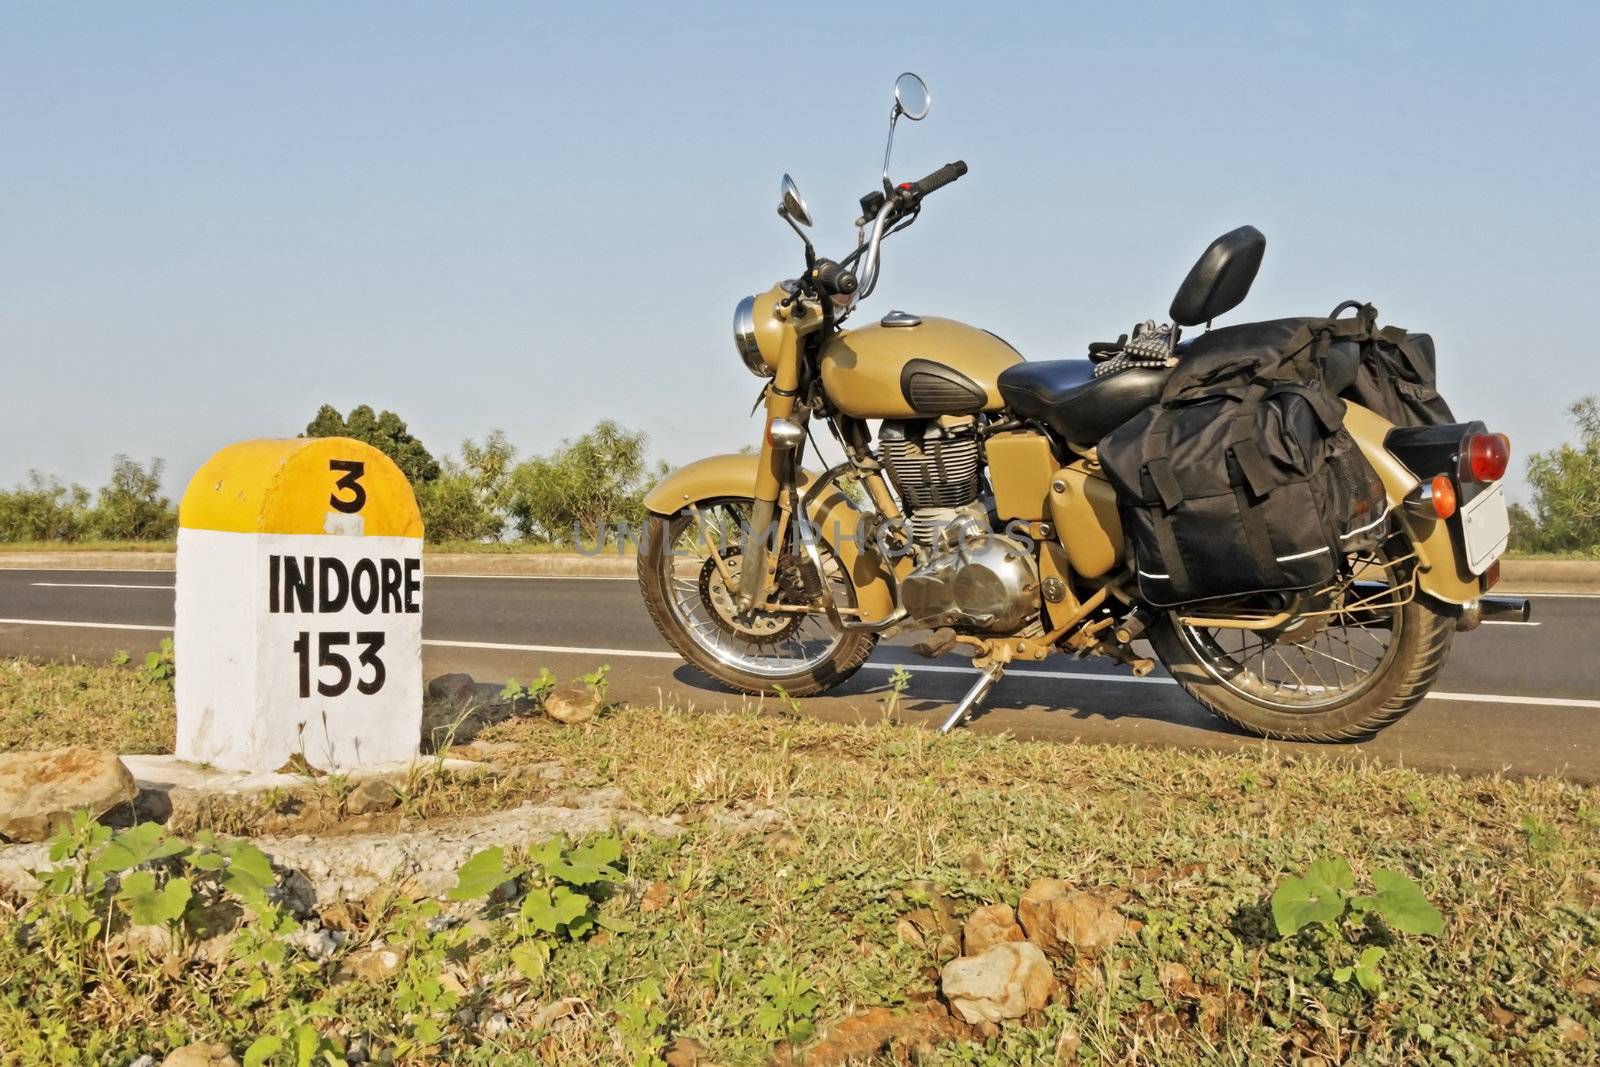 Indian motorcycle parked on NH3 Mumbai Agra Road at the 153kms milestone in the hinterlands of India